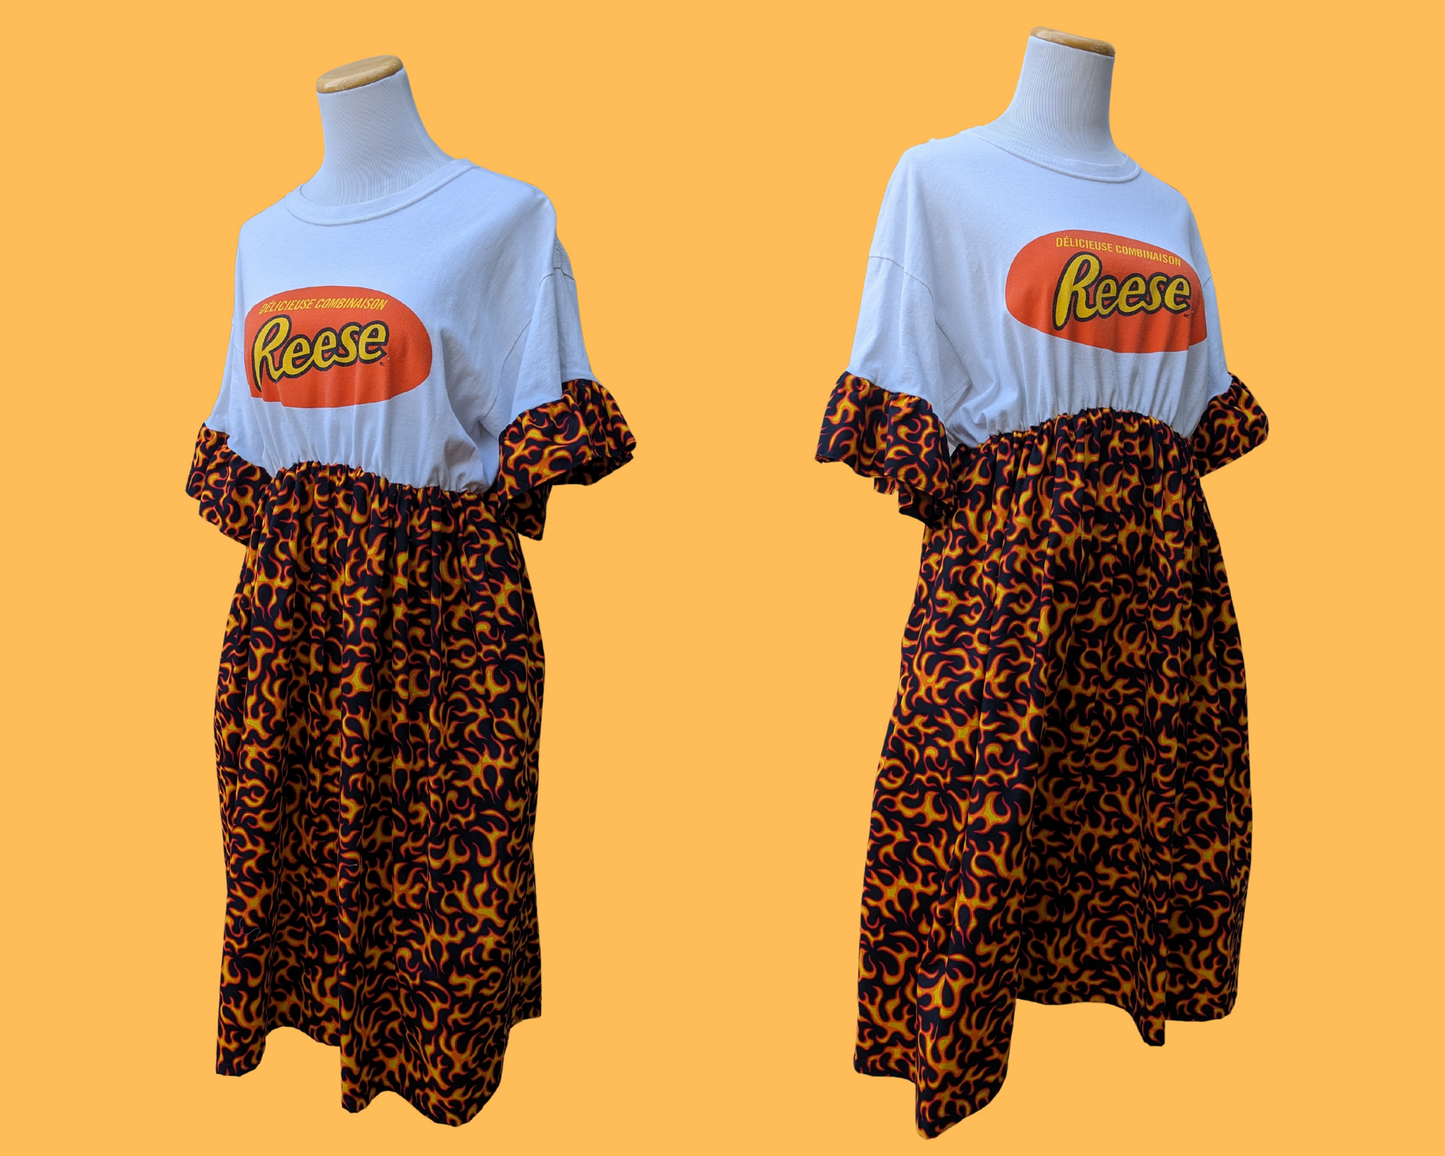 Handmade, Upcycled Reese T-Shirt Dress with Flames Patterned Fabric Size L